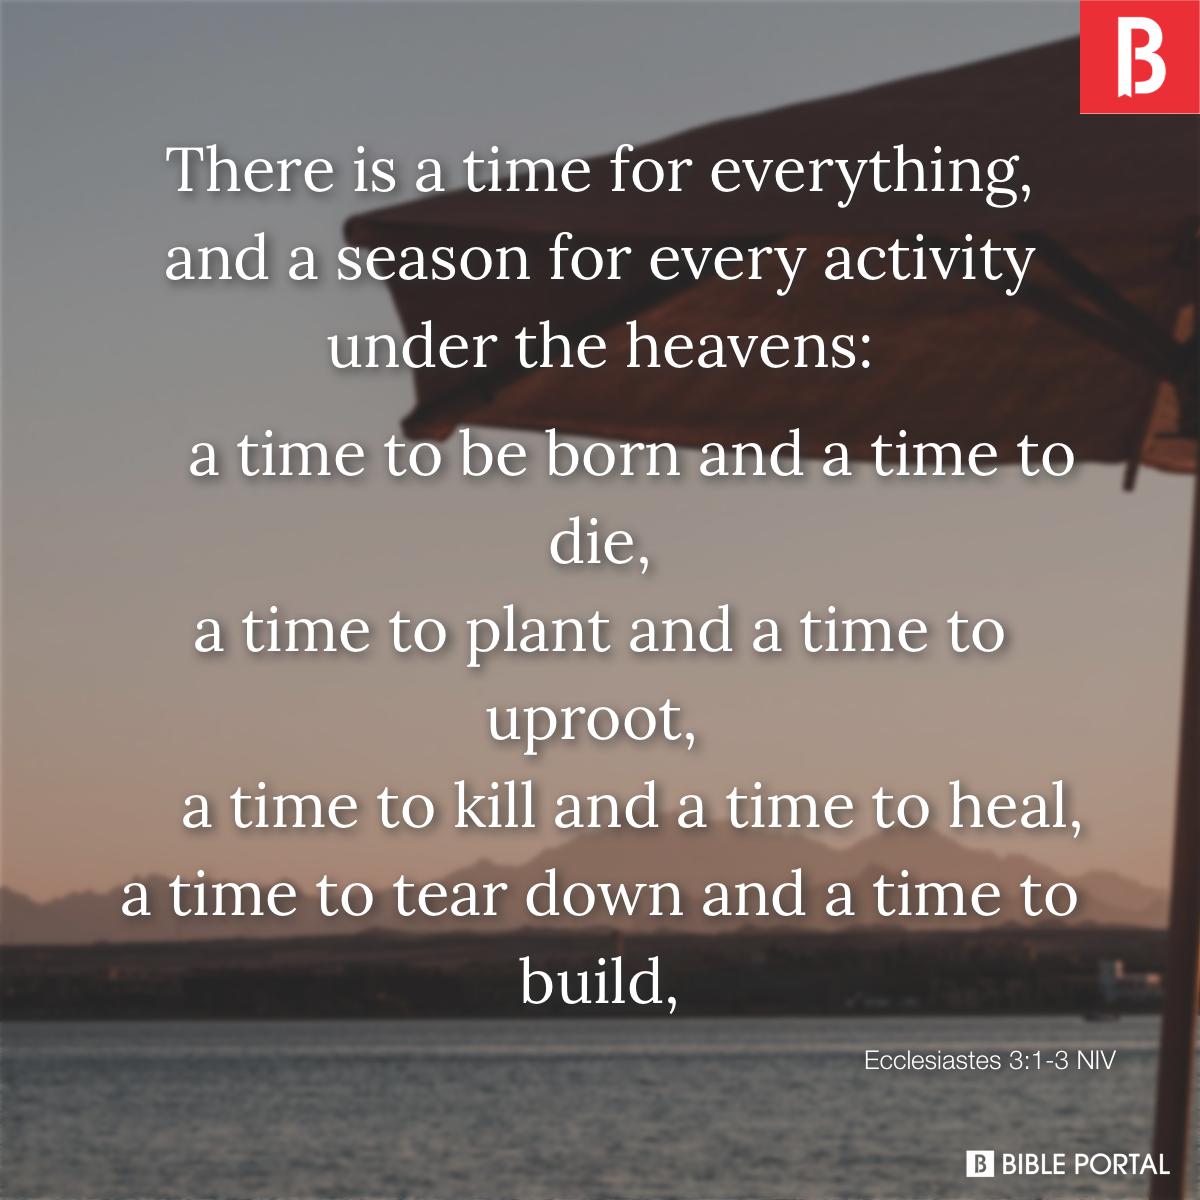 Ecclesiastes 3:1-11 There is a time for everything, and a season for every  activity under the heavens: a time to be born and a time to die, a time to  plant and